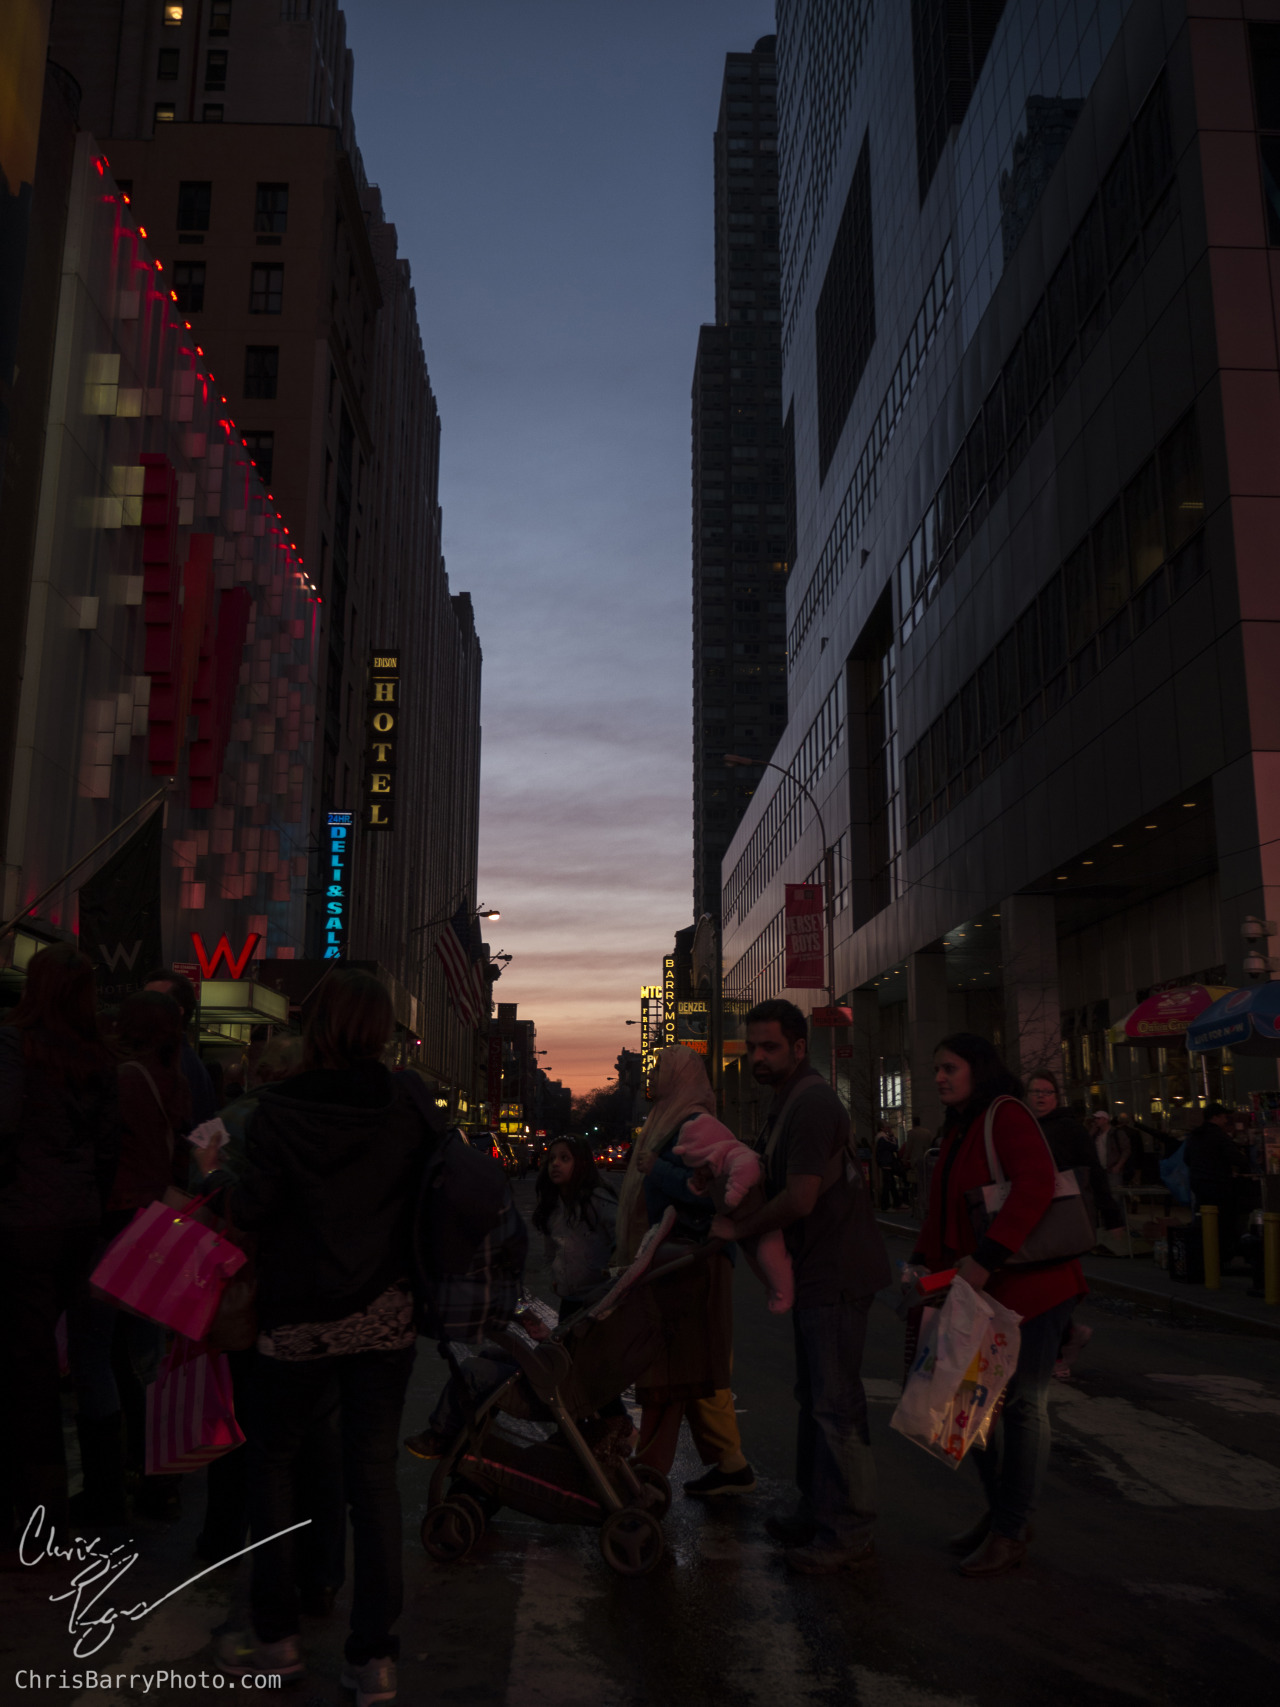 Sunset (probably somewhere around times square given the amount of people walking around)